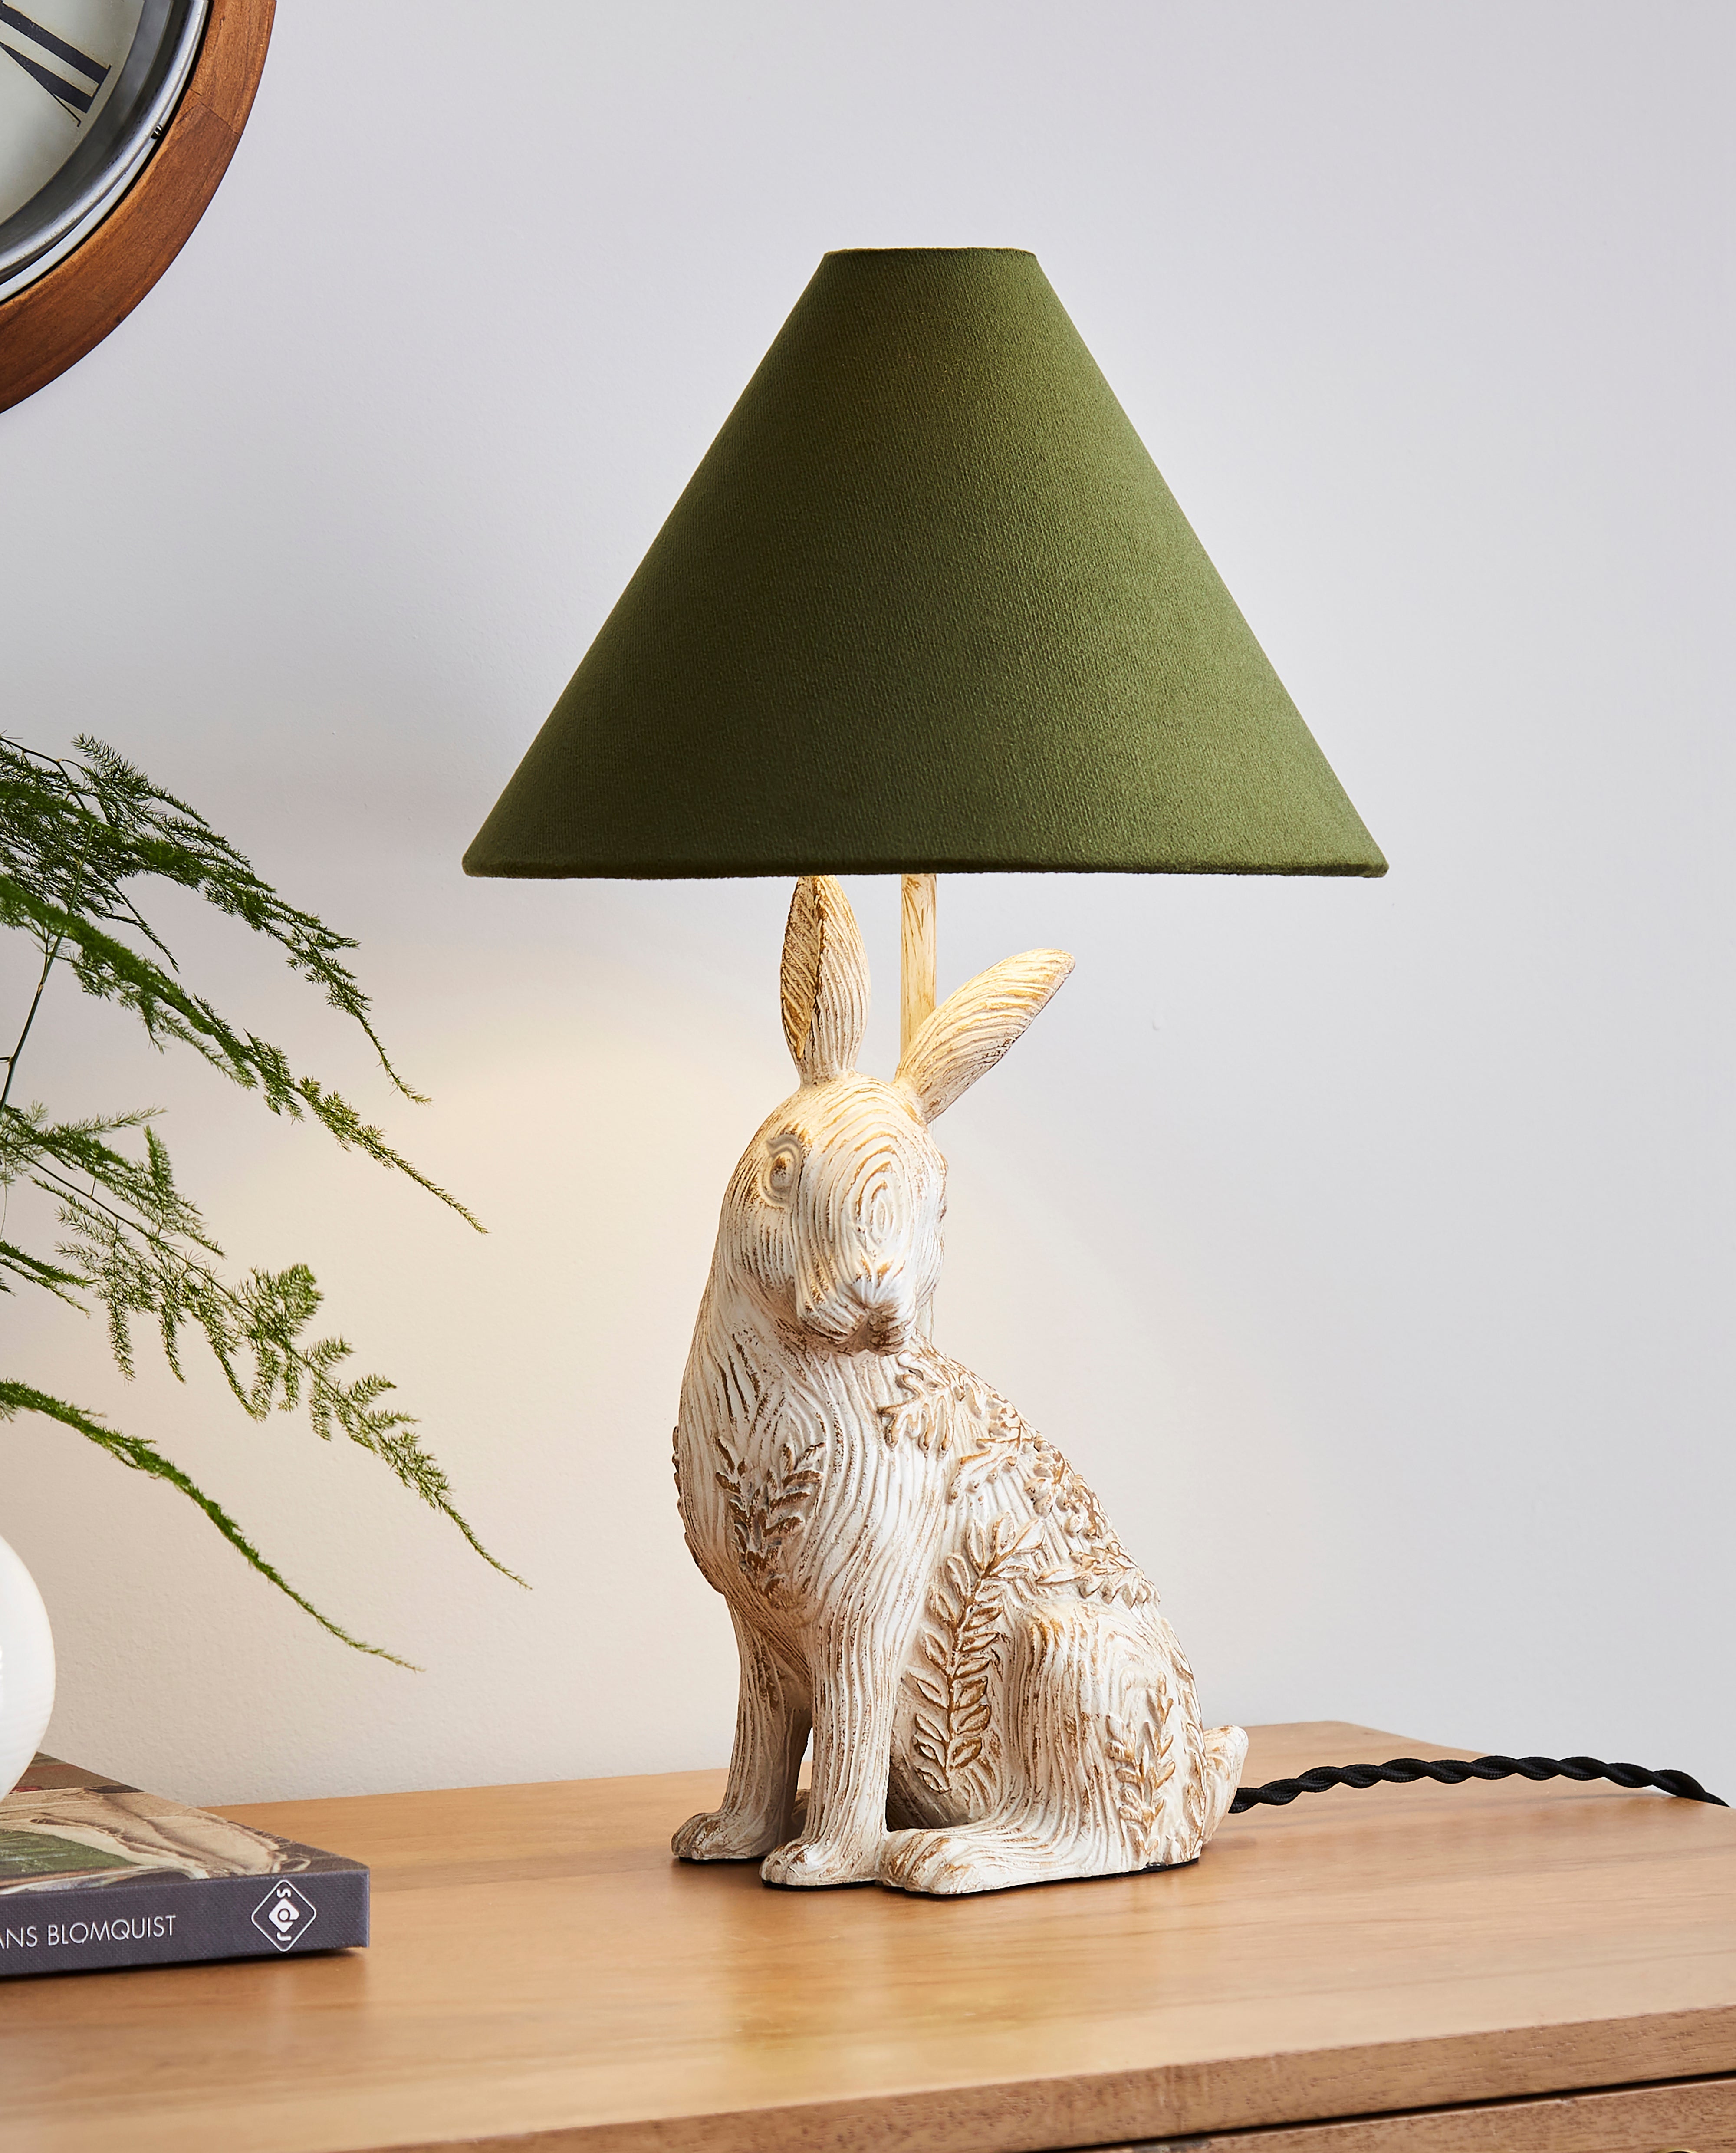 Hare Resin Table Lamp Natural